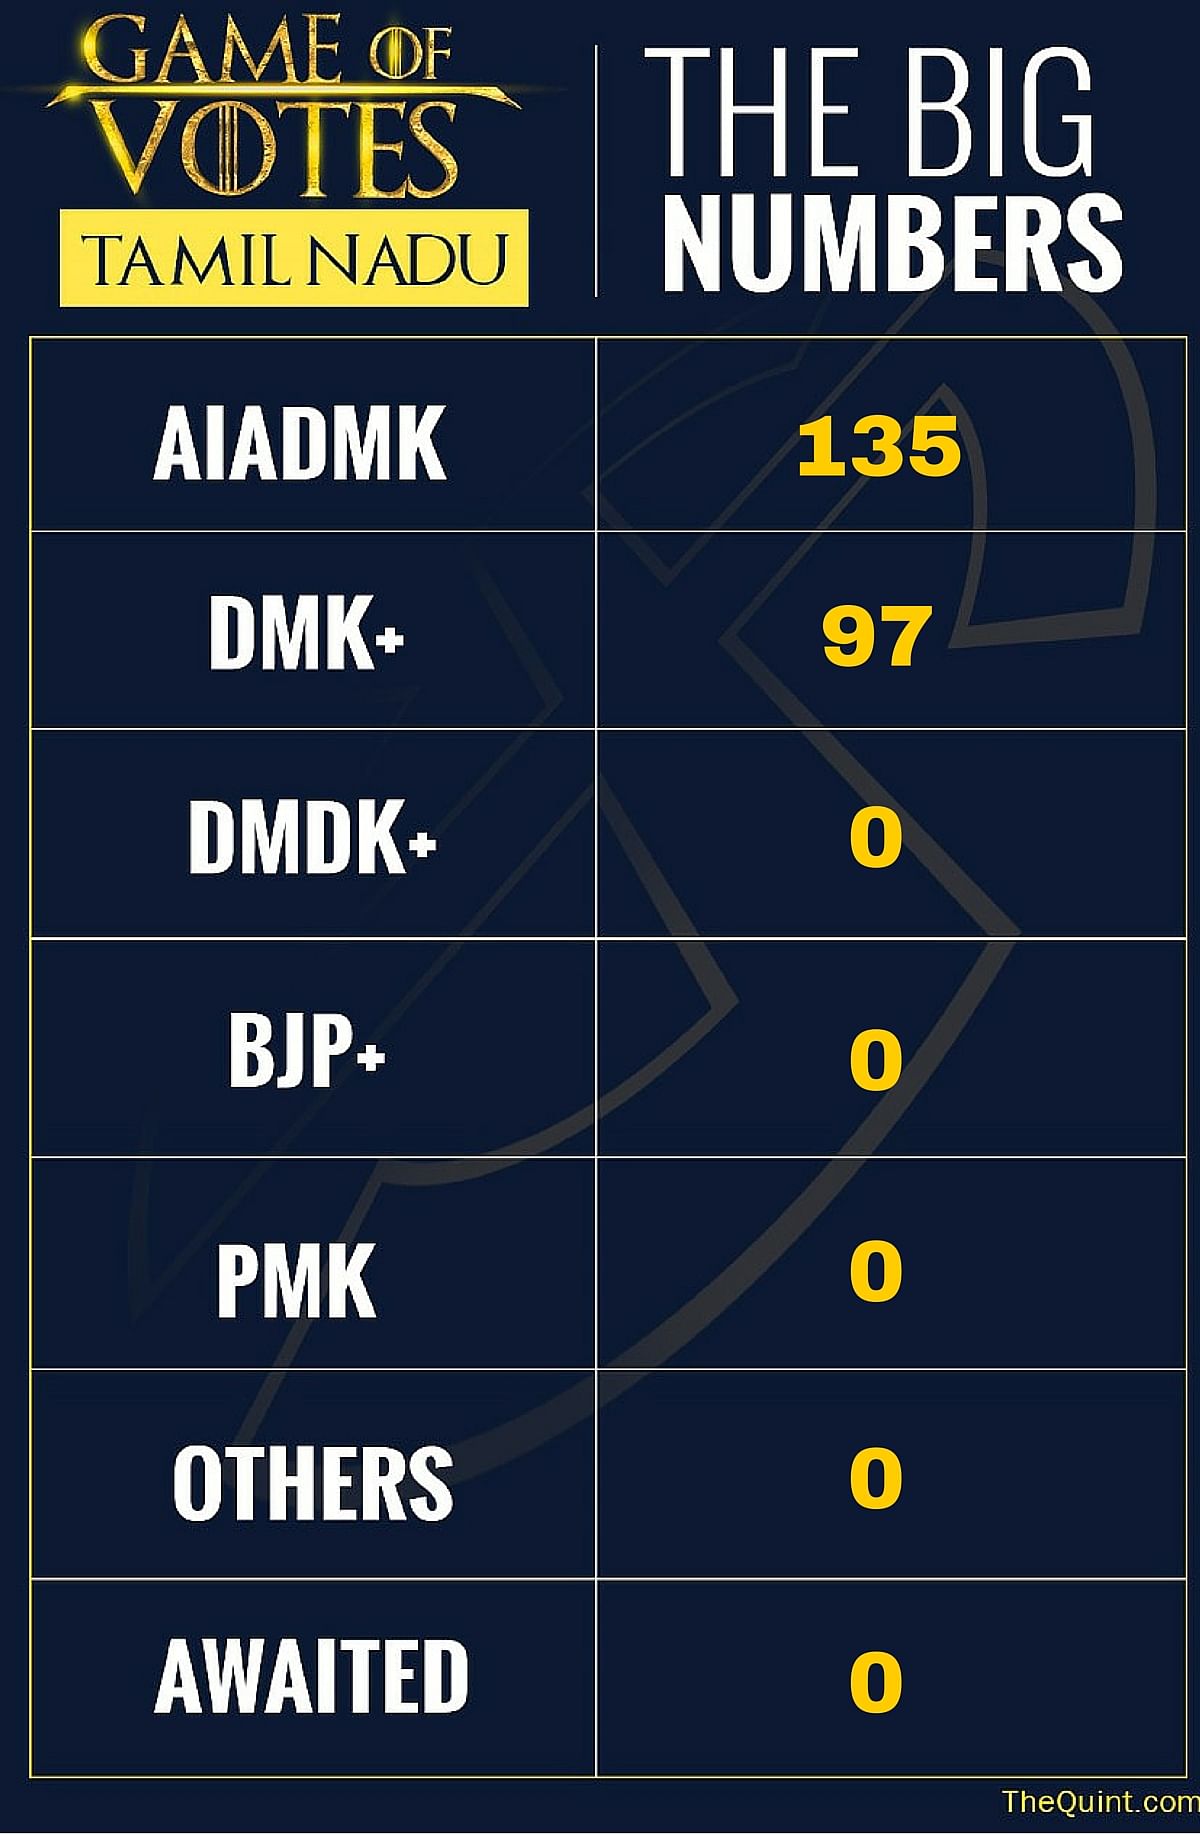 Tamil Nadu had seen a voter turn out of 74.26%, which ended in a majority for Jayalalithaa led AIADMK.